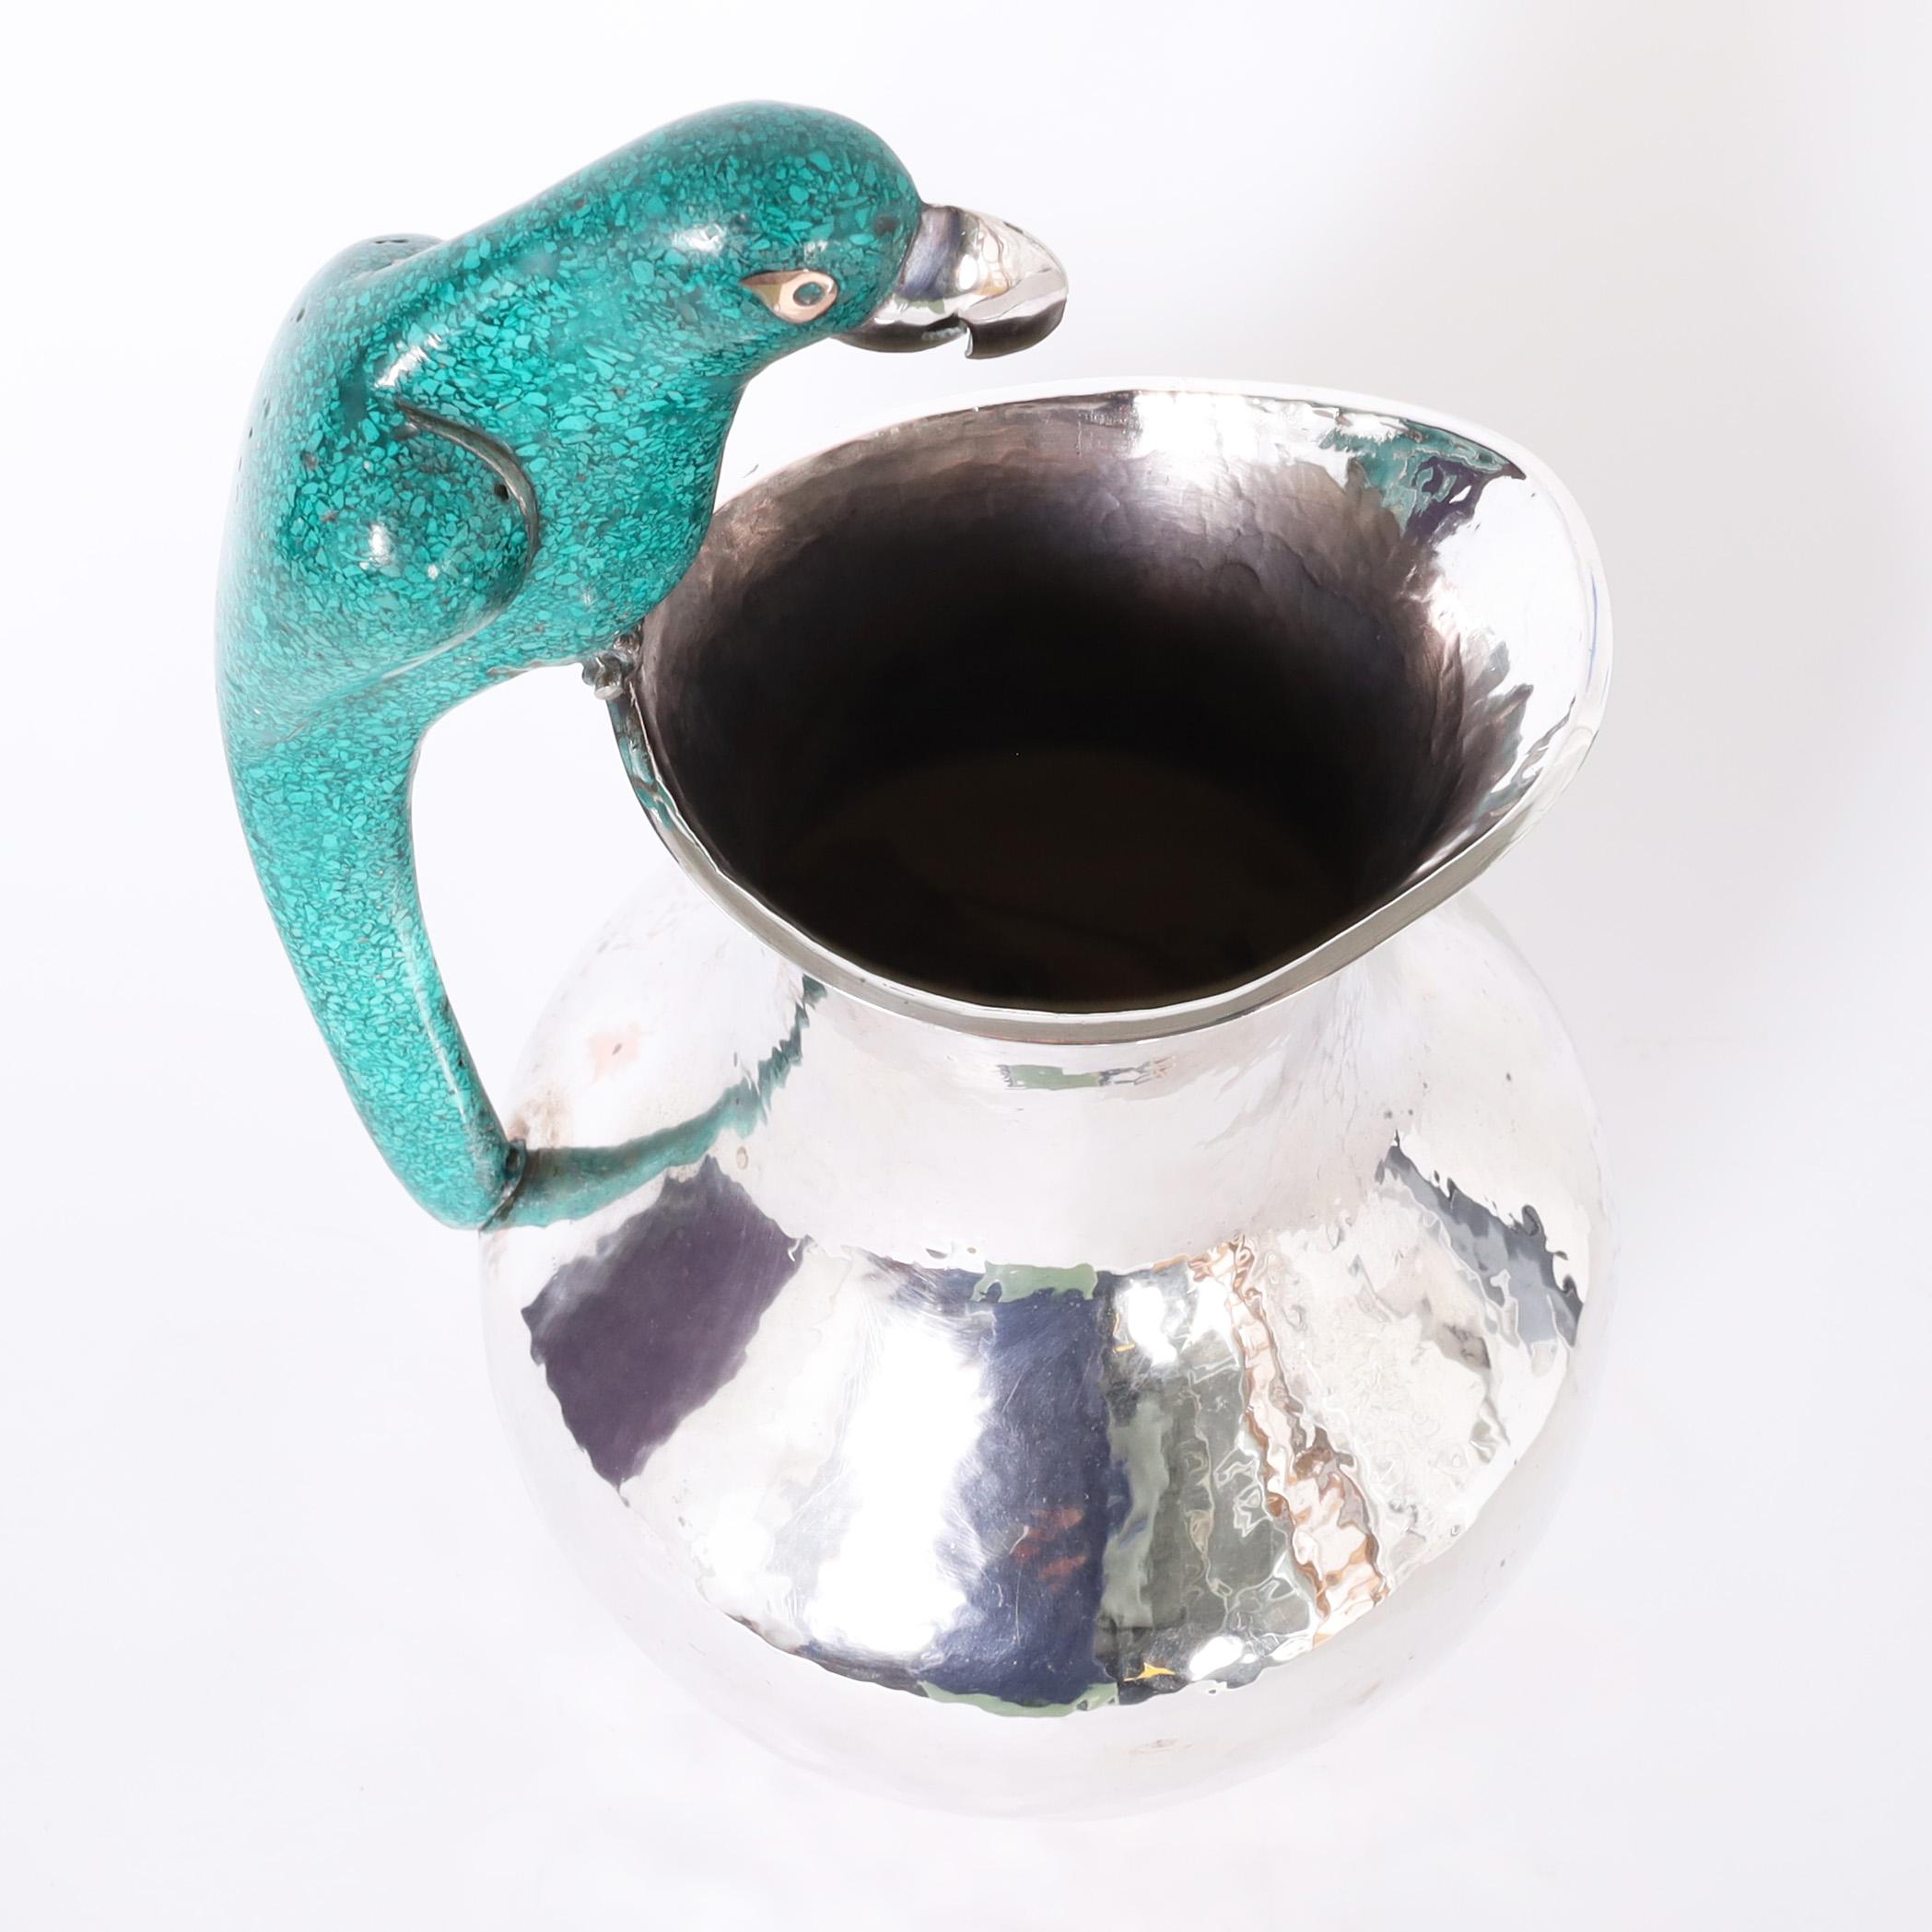 Standout vintage pitcher, in the style of Los Castillo, handcrafted in silver plate over hammered copper, featuring a terrazza clad parrot as a handle. 